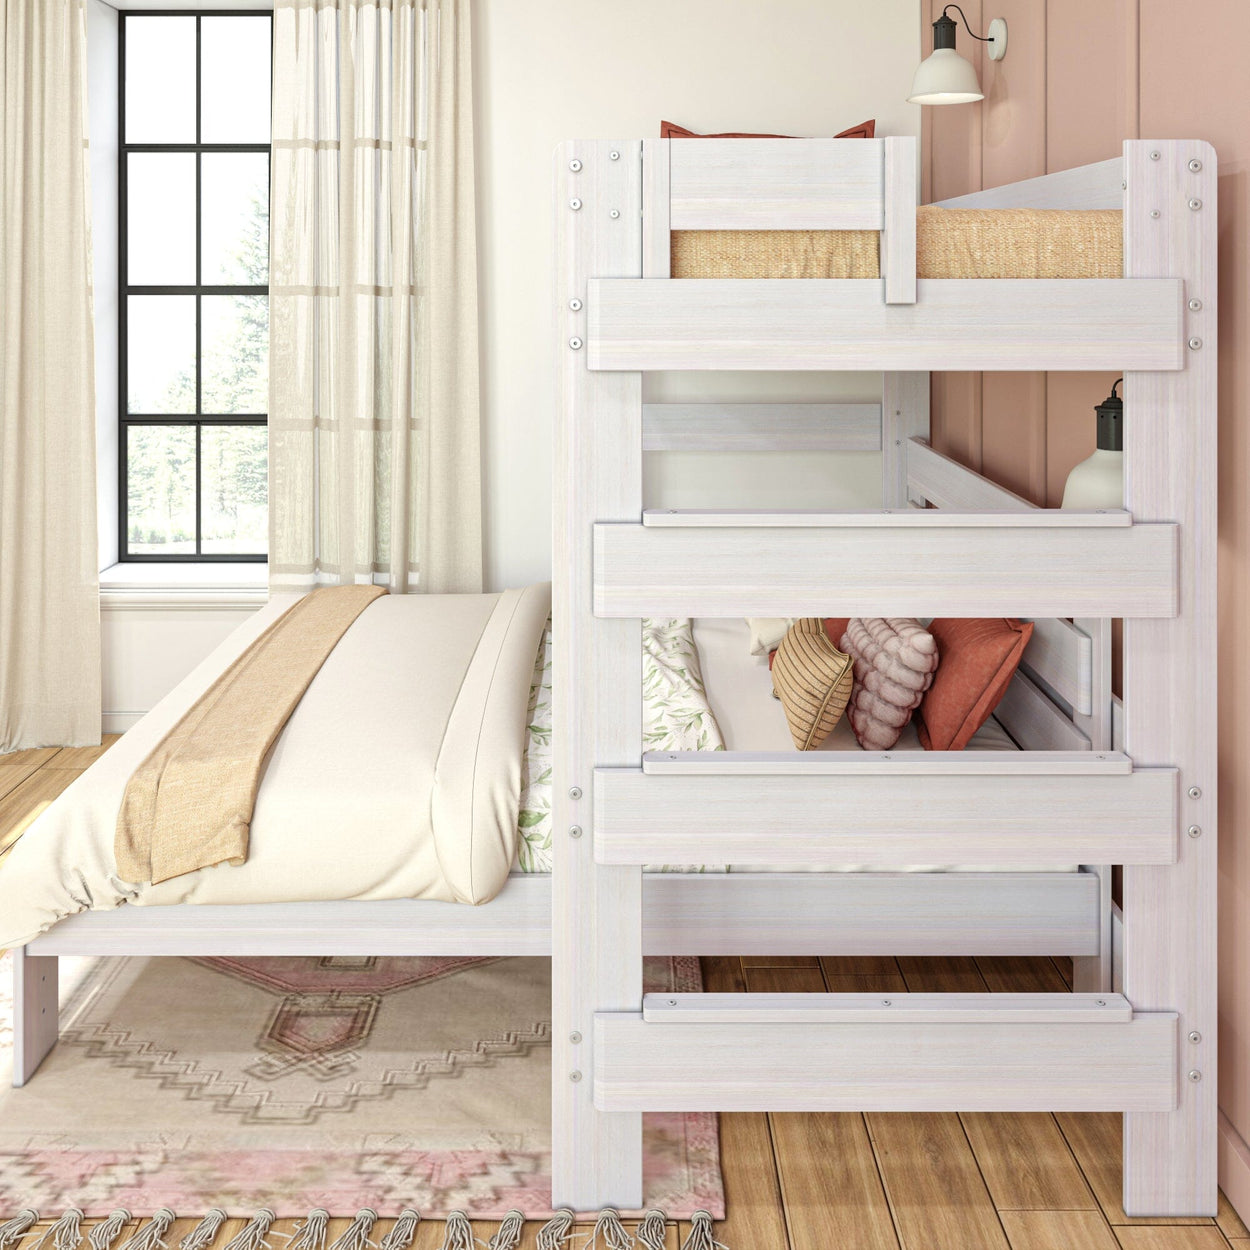 19-813-182 : Bunk Beds Farmhouse Twin over Queen L-Shaped Bunk Bed, White Wash